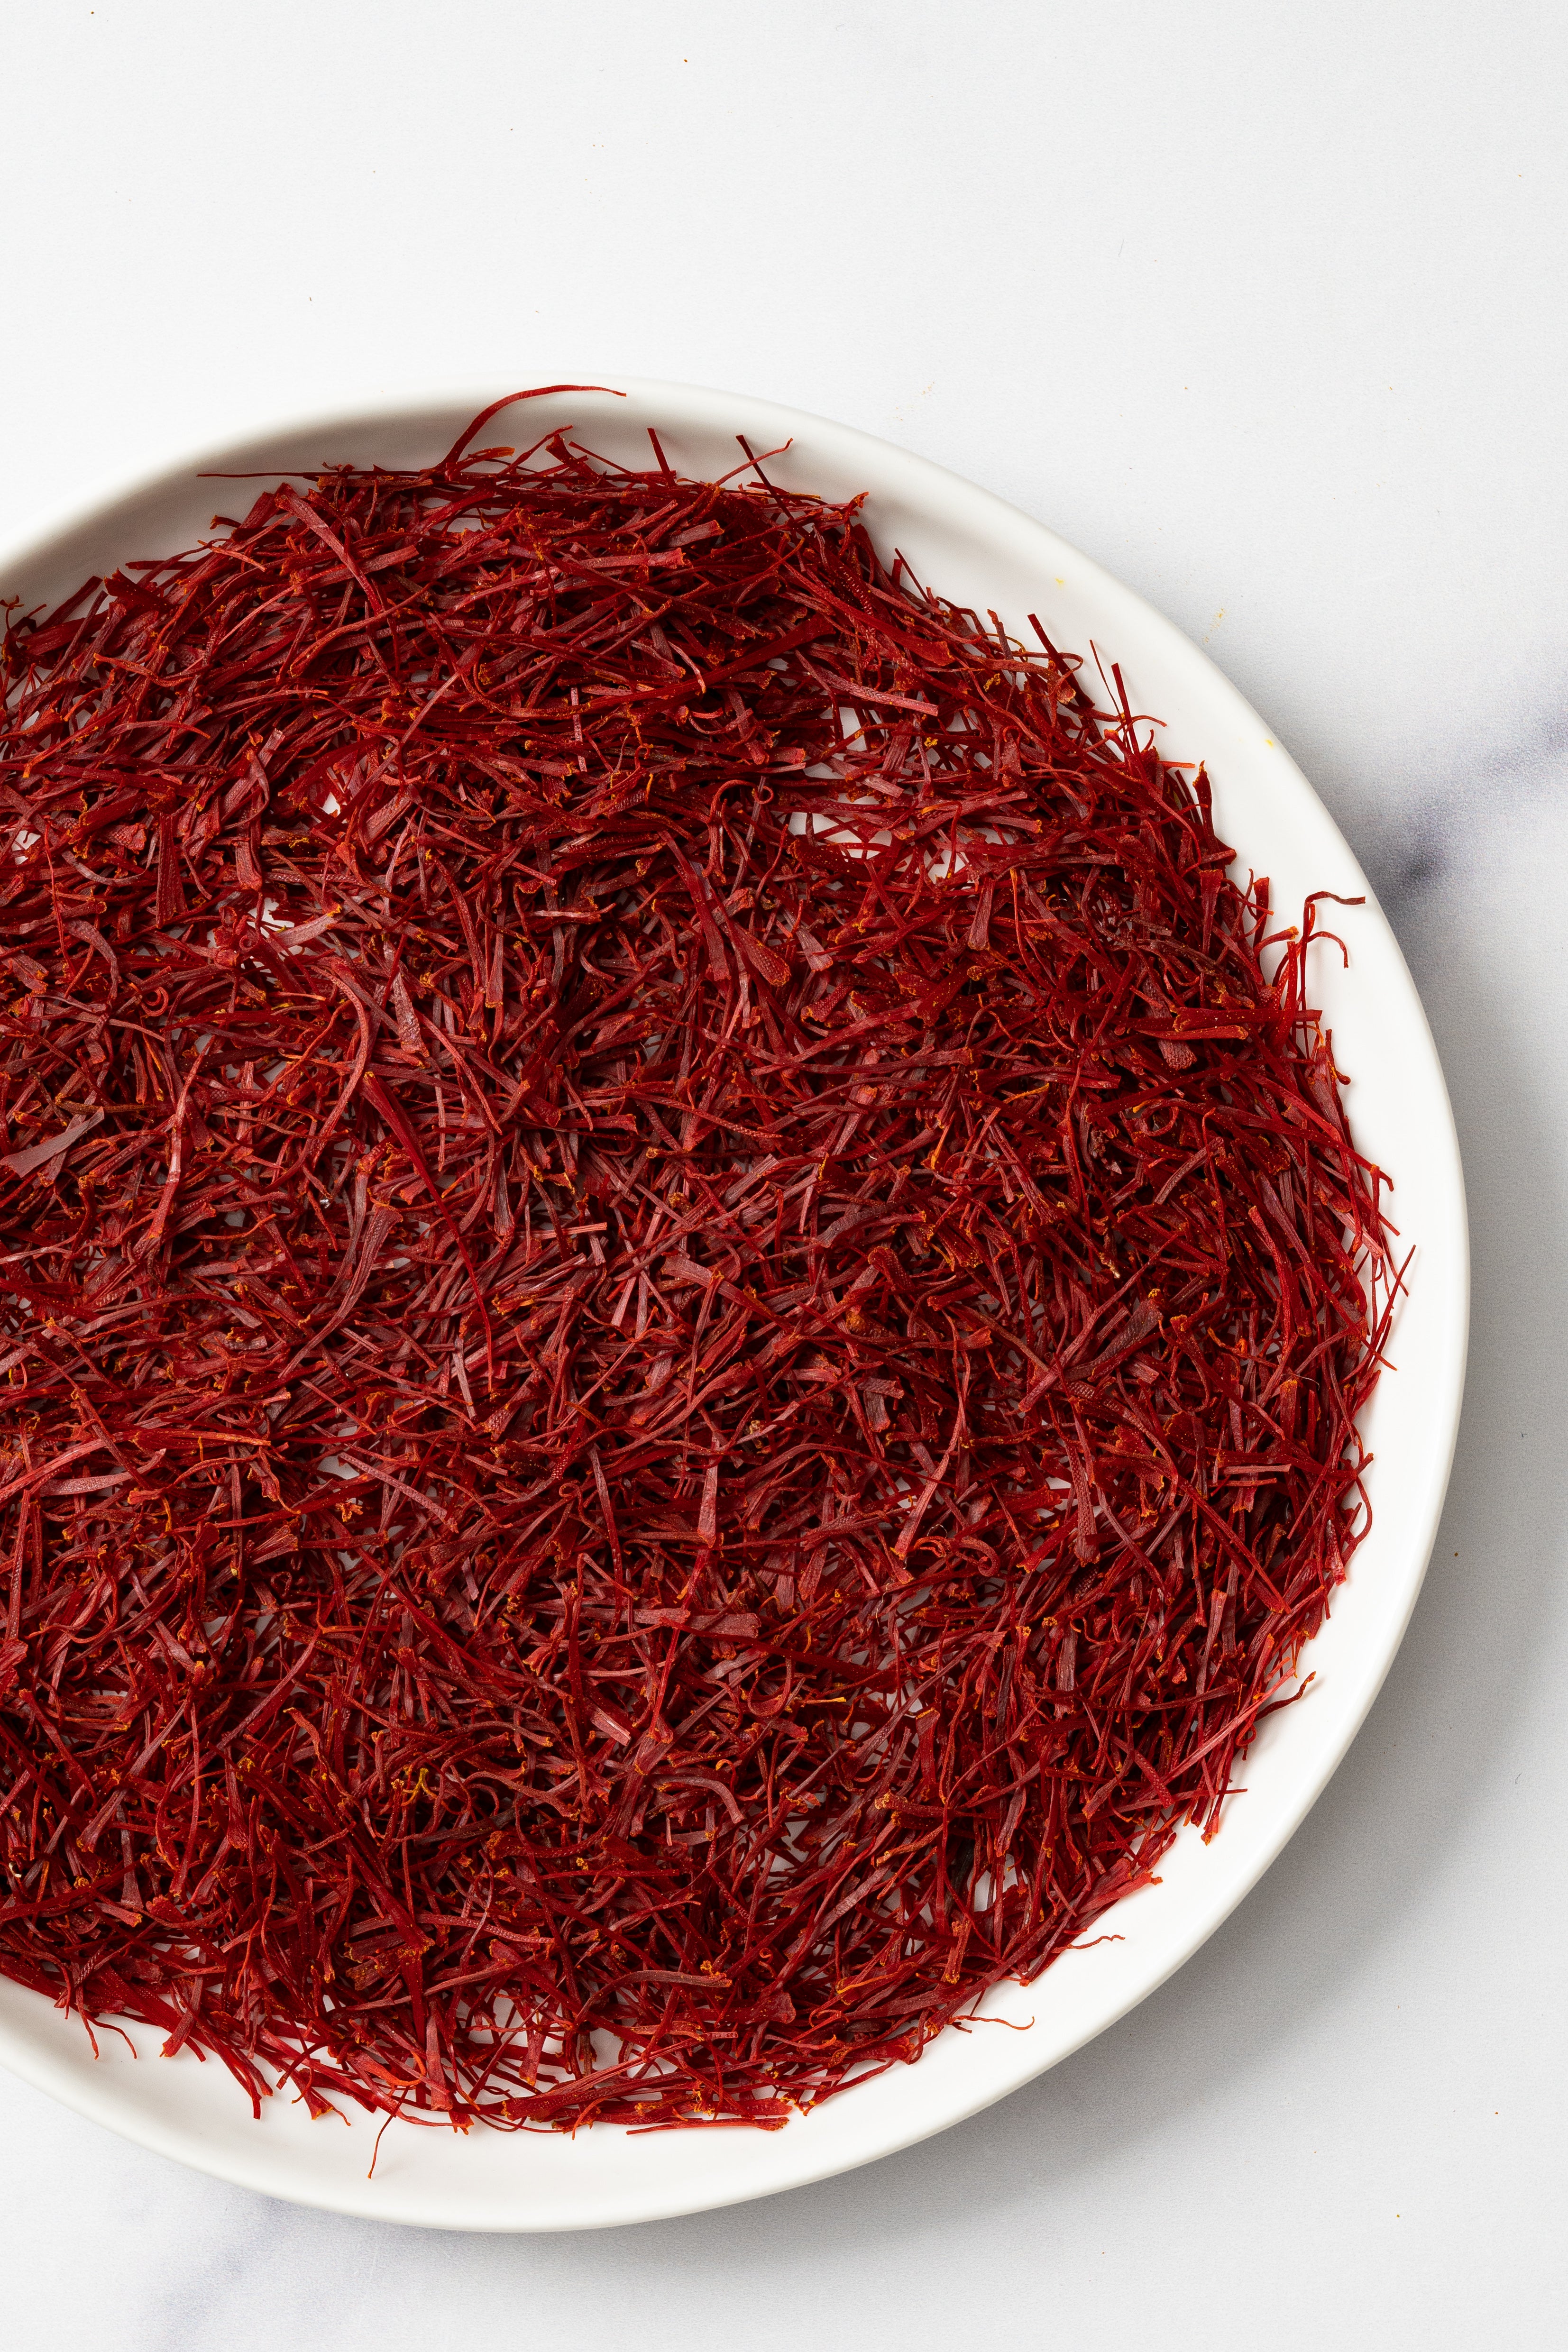 Saffron FAQ: Answers to Your Top Questions